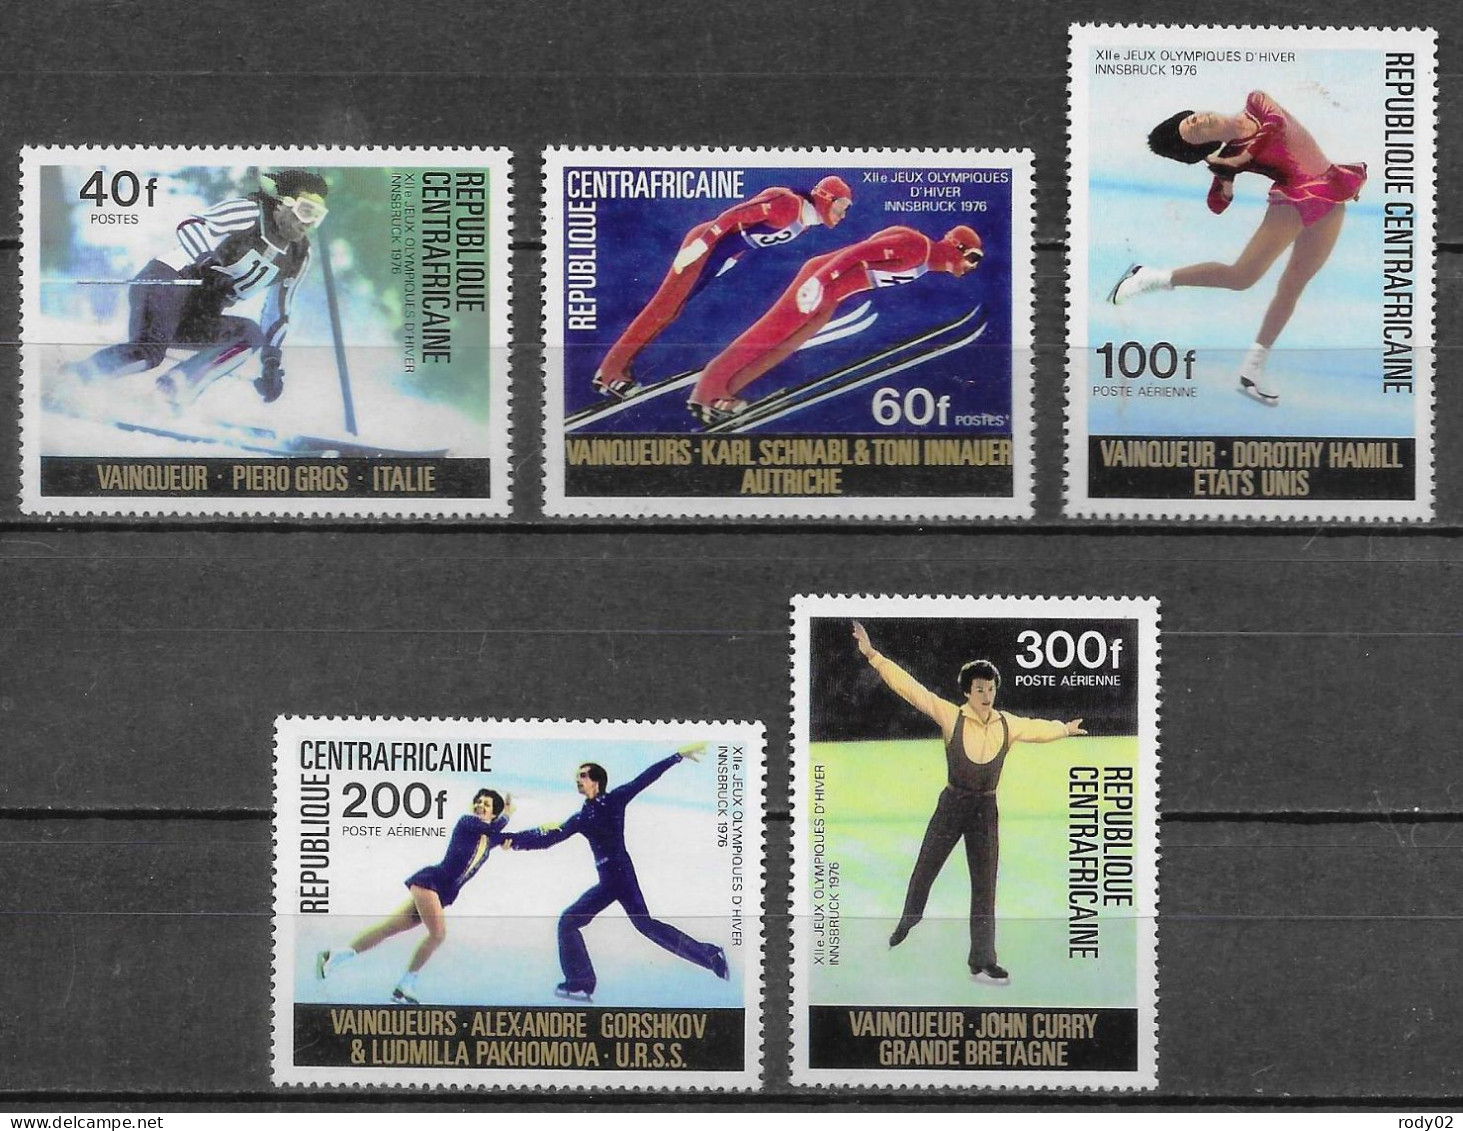 CENTRAFRIQUE - JEUX OLYMPIQUES D'HIVER A INNSBRUCK  - N° 262 ET 263, PA 150 A 152 ET BF 11 - NEUF** MNH - Inverno1976: Innsbruck